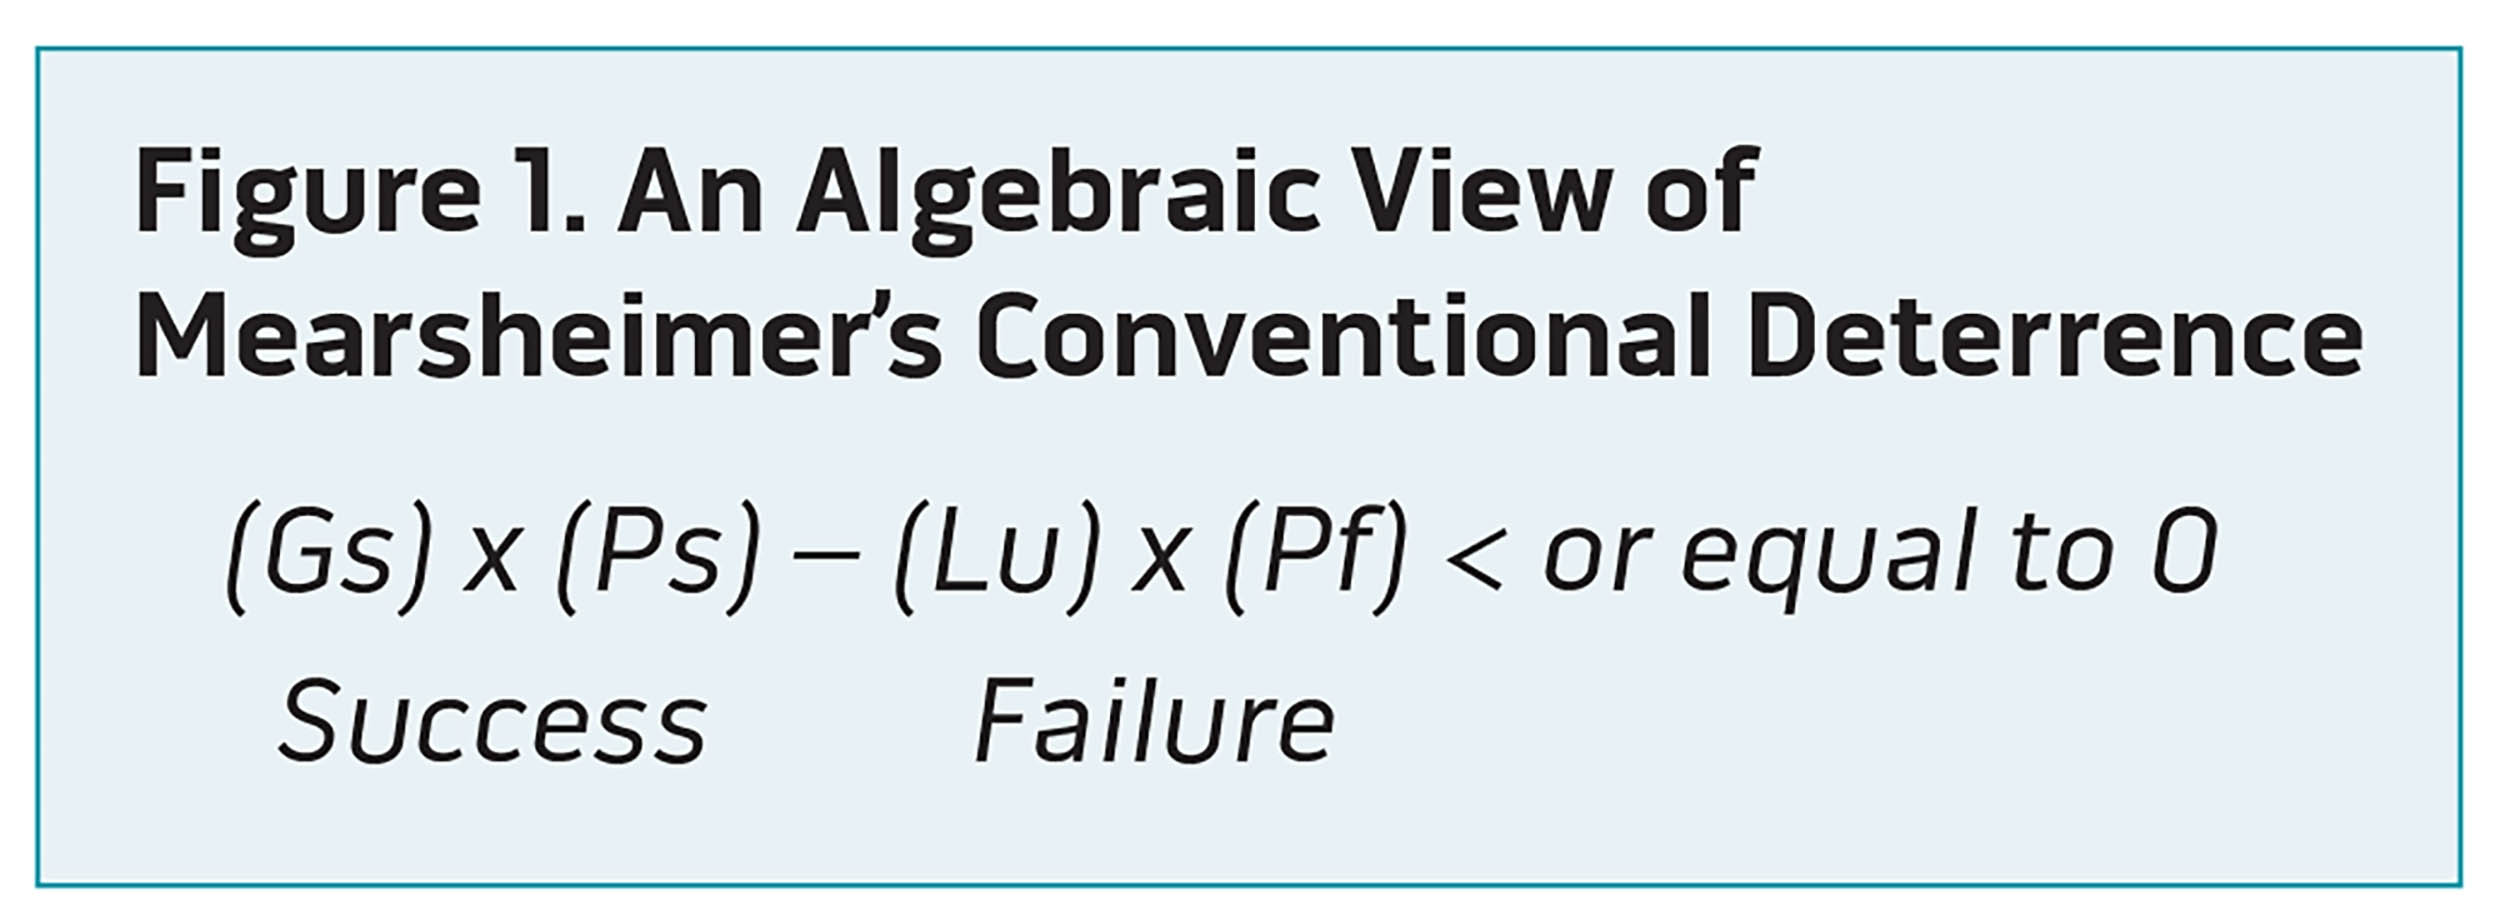 Figure 1. An Algebraic View of
Mearsheimer’s Conventional Deterrence